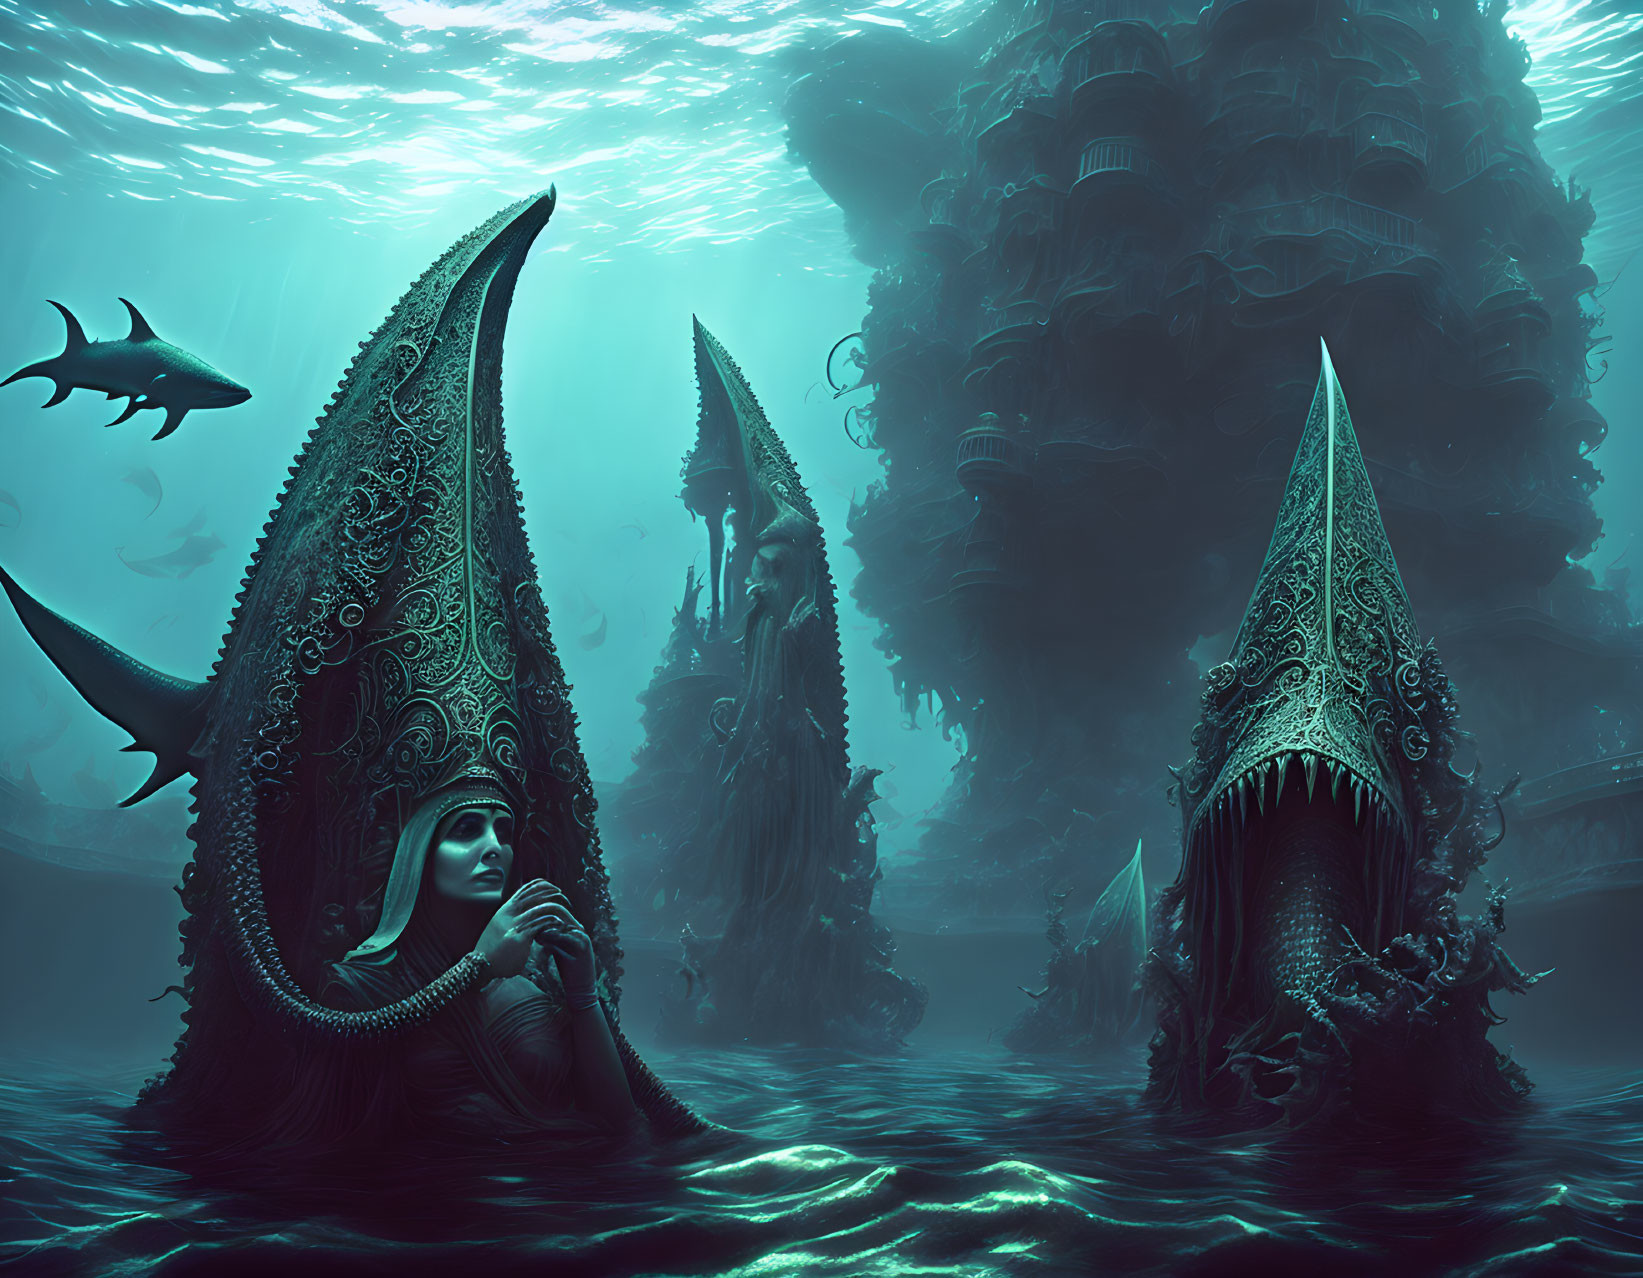 Mystical underwater scene with shark-shaped structures, person, city ruins, and swimming sharks